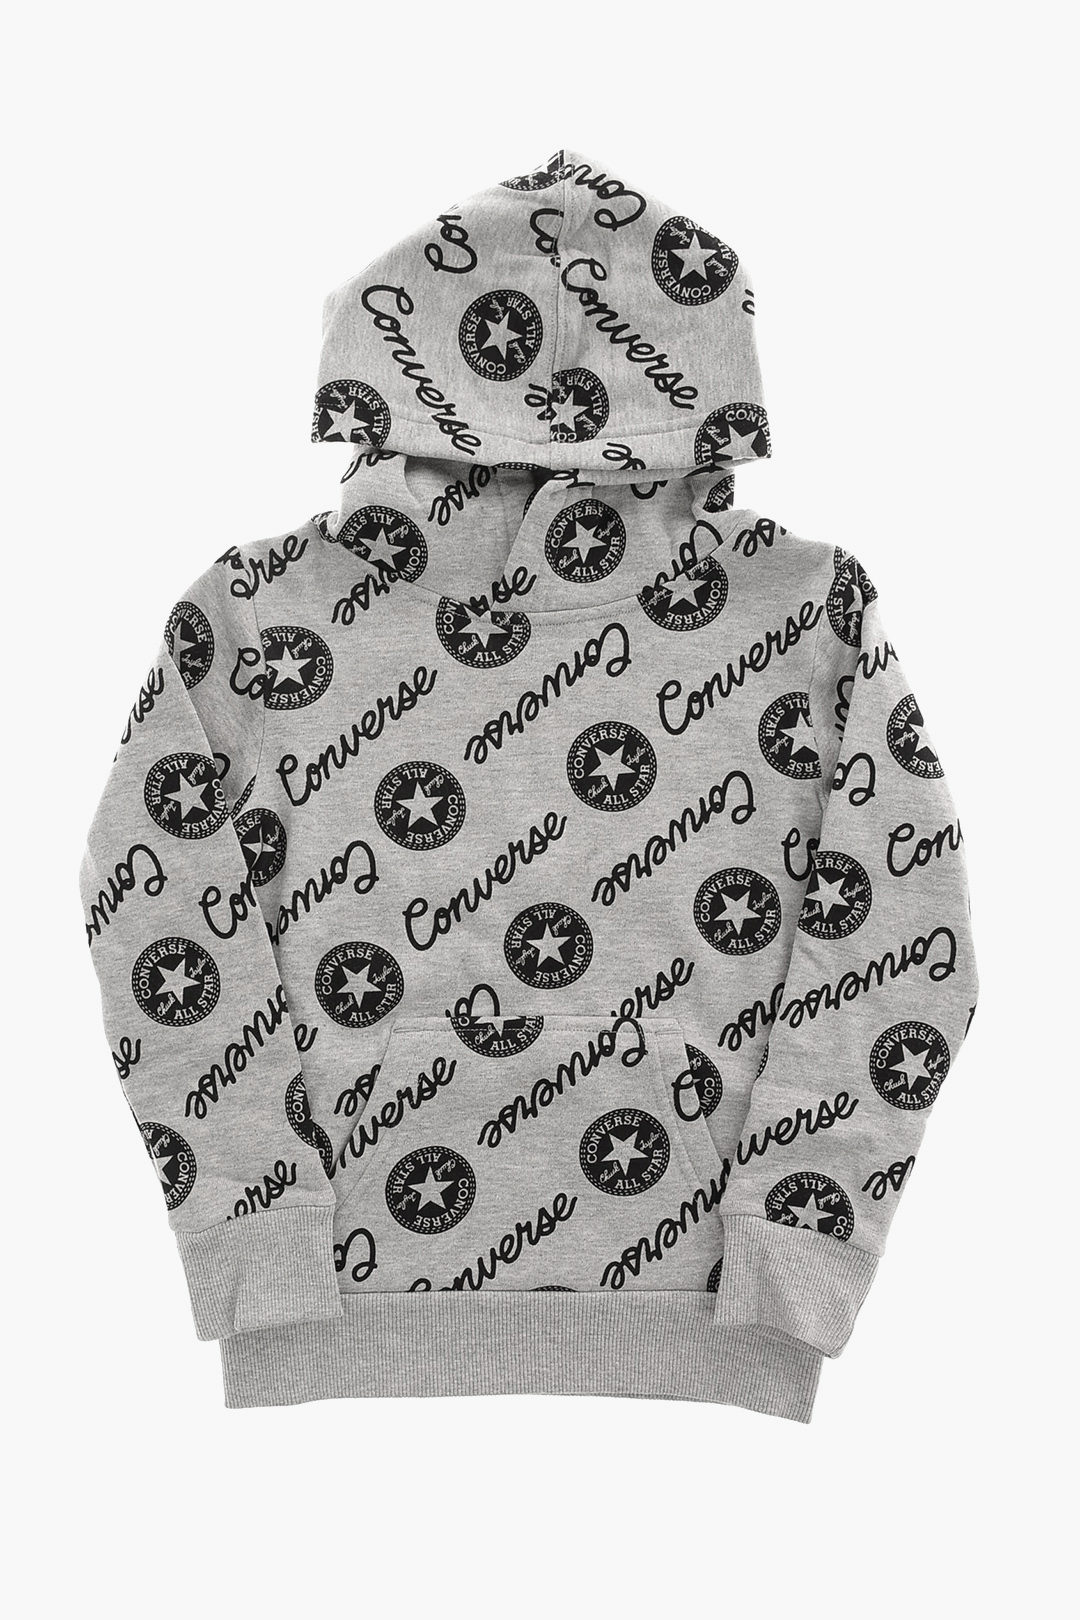 Converse boys Logo All with STAR Outlet Hood KIDS ALL Glamood Over Sweatshirt -